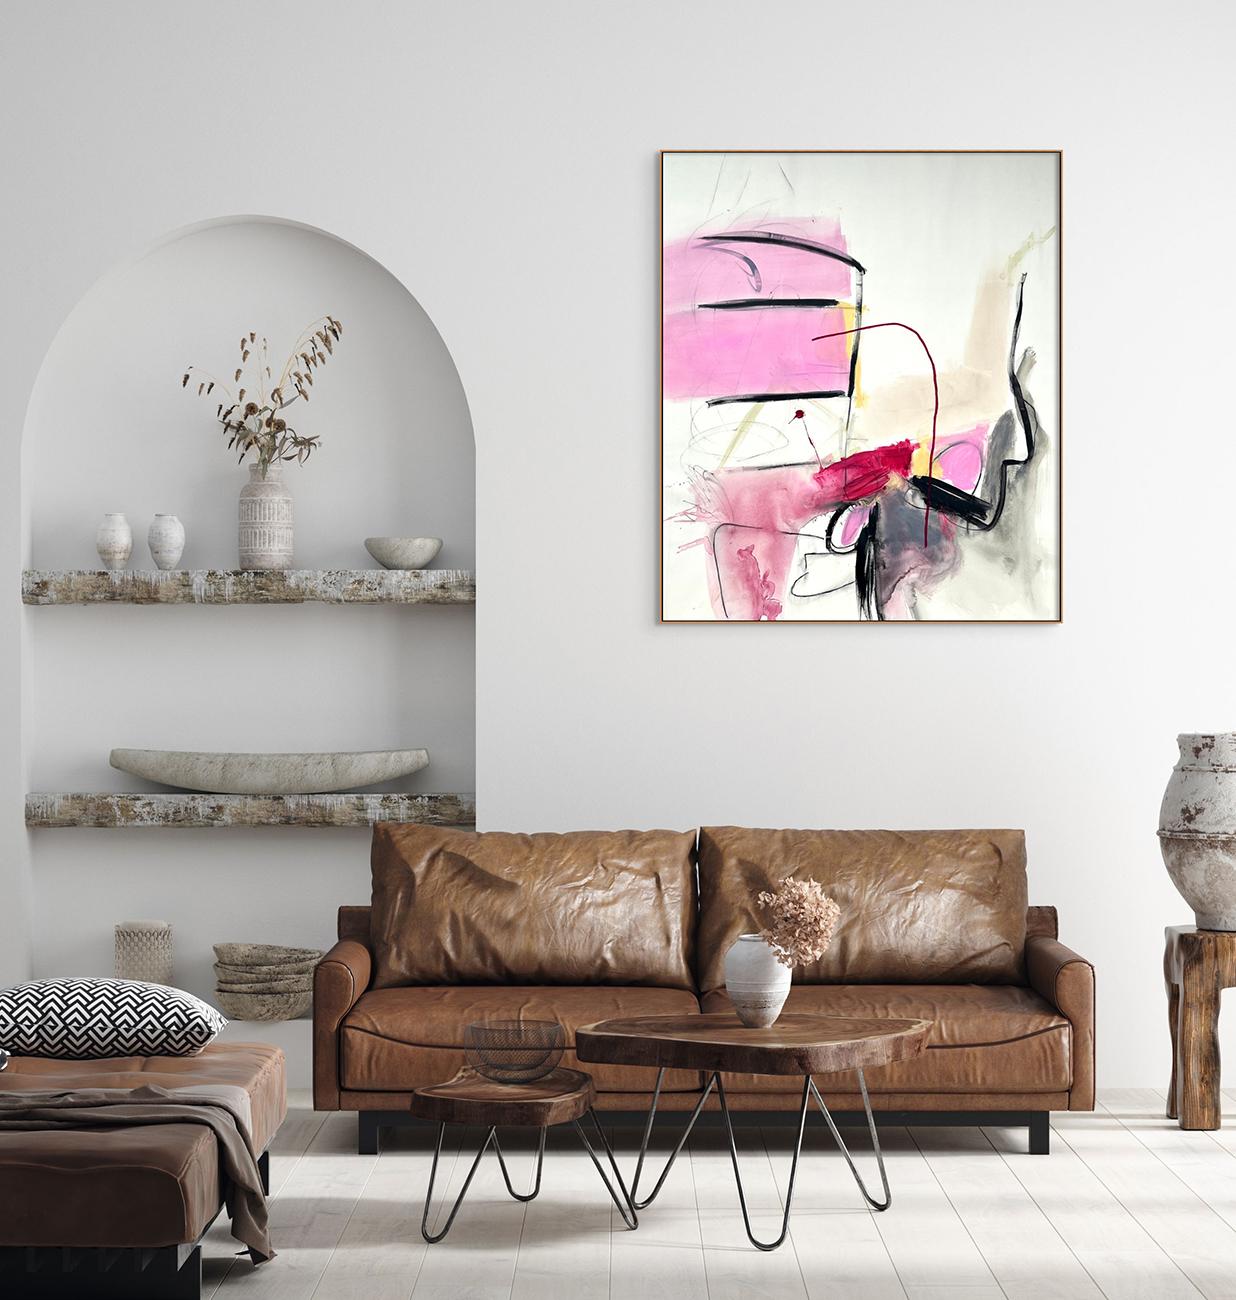 Two Stories (Abstract painting) - Painting by Adrienn Krahl